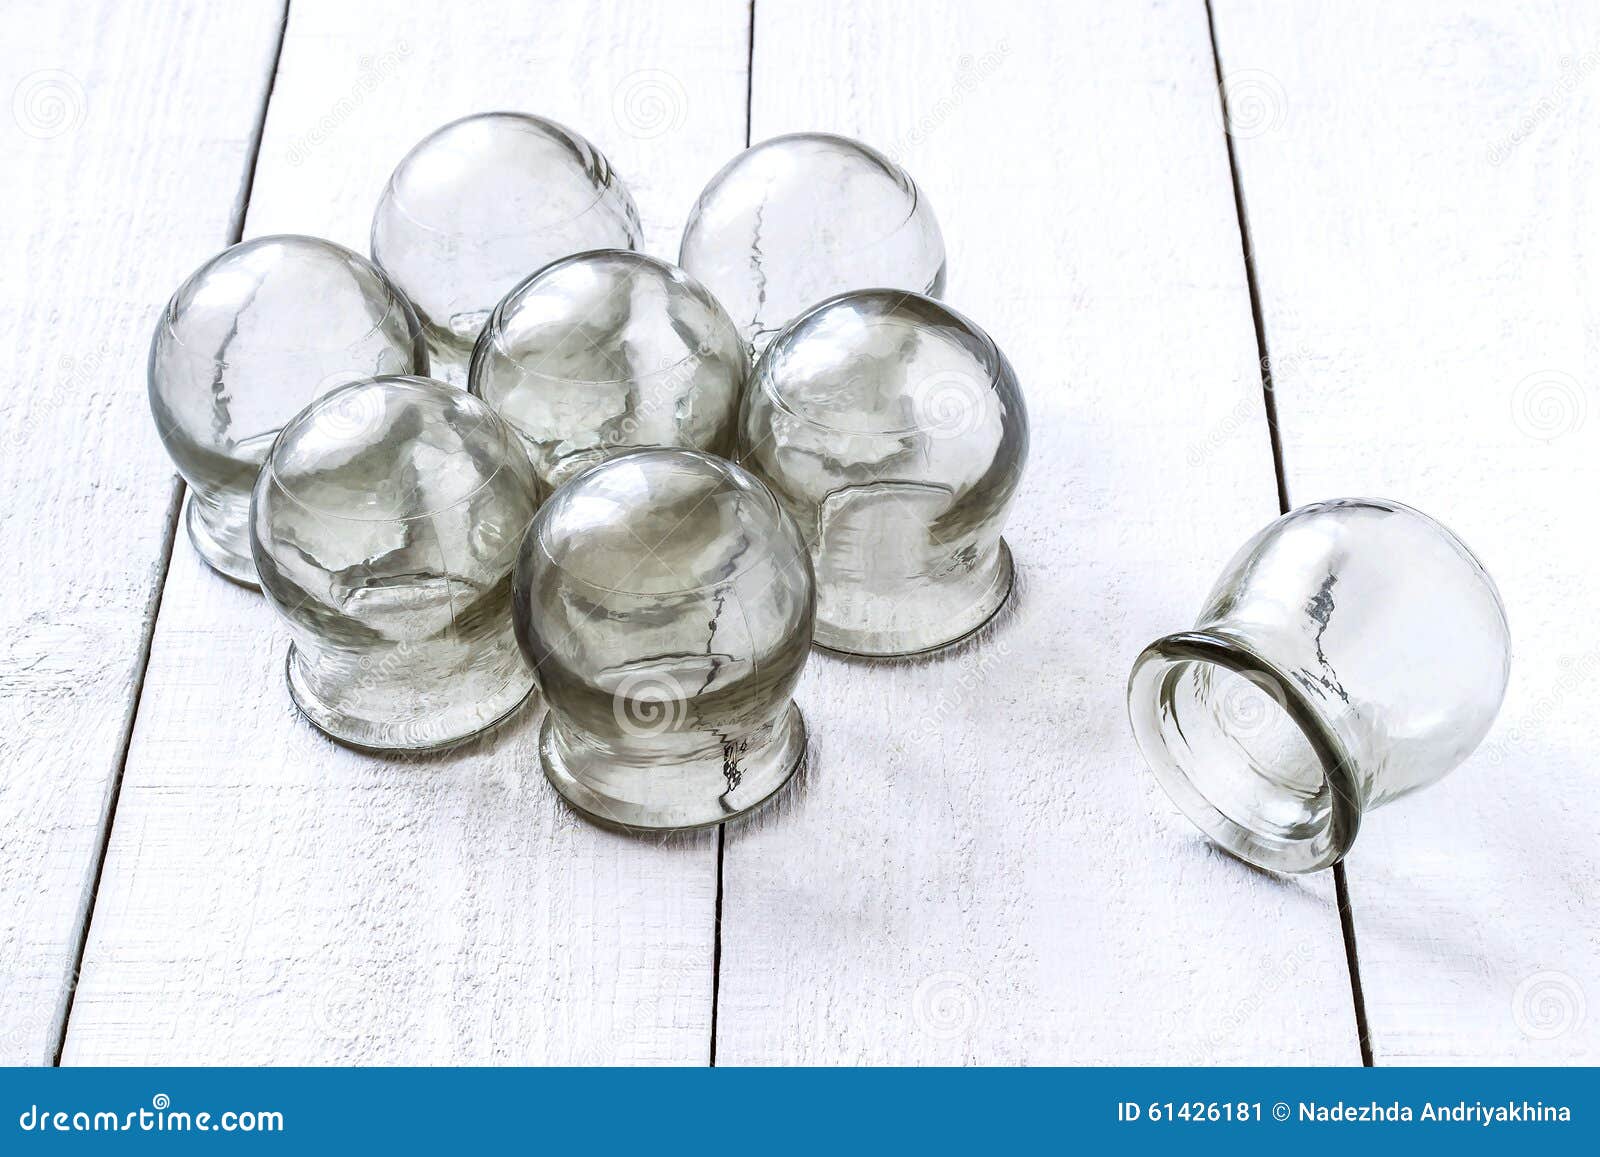 old medical cupping glass